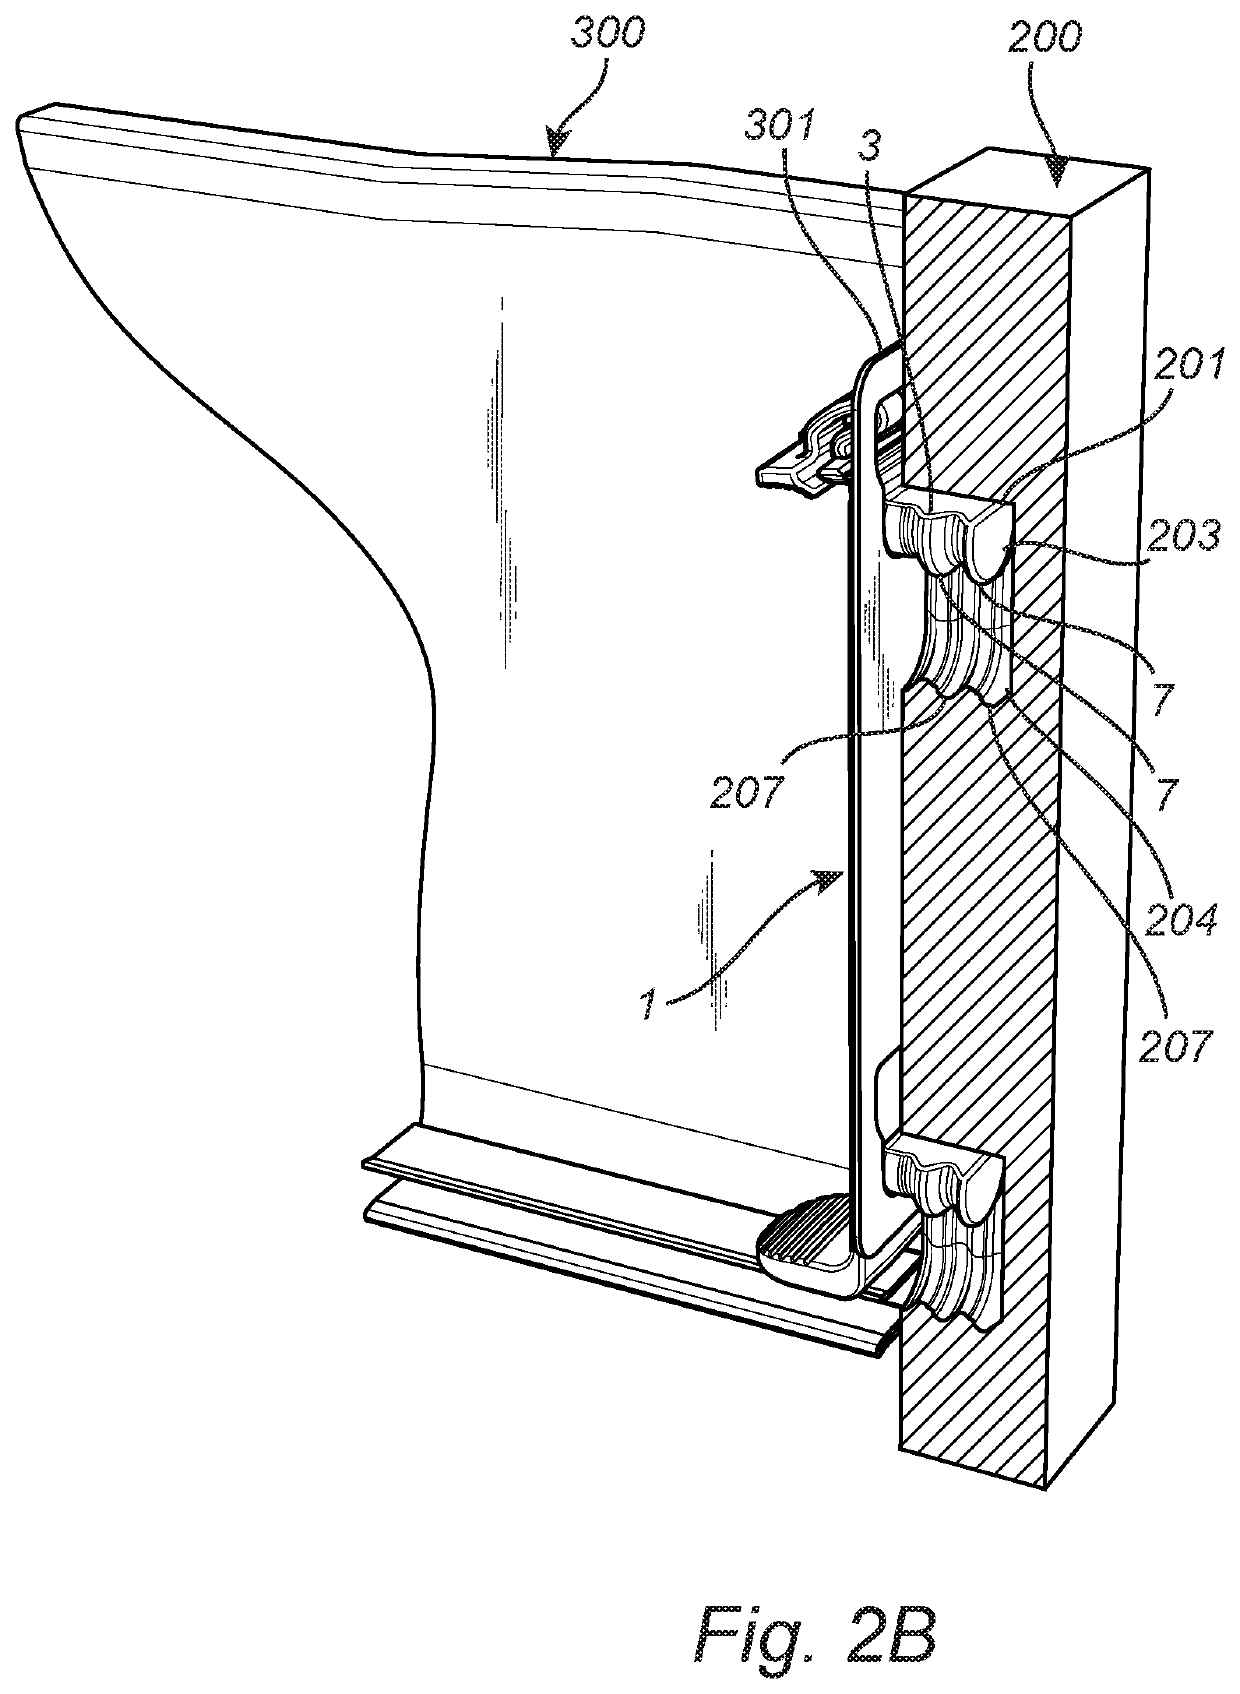 Connector bracket and system comprising a connector bracket adapted to form part of a locking arrangement